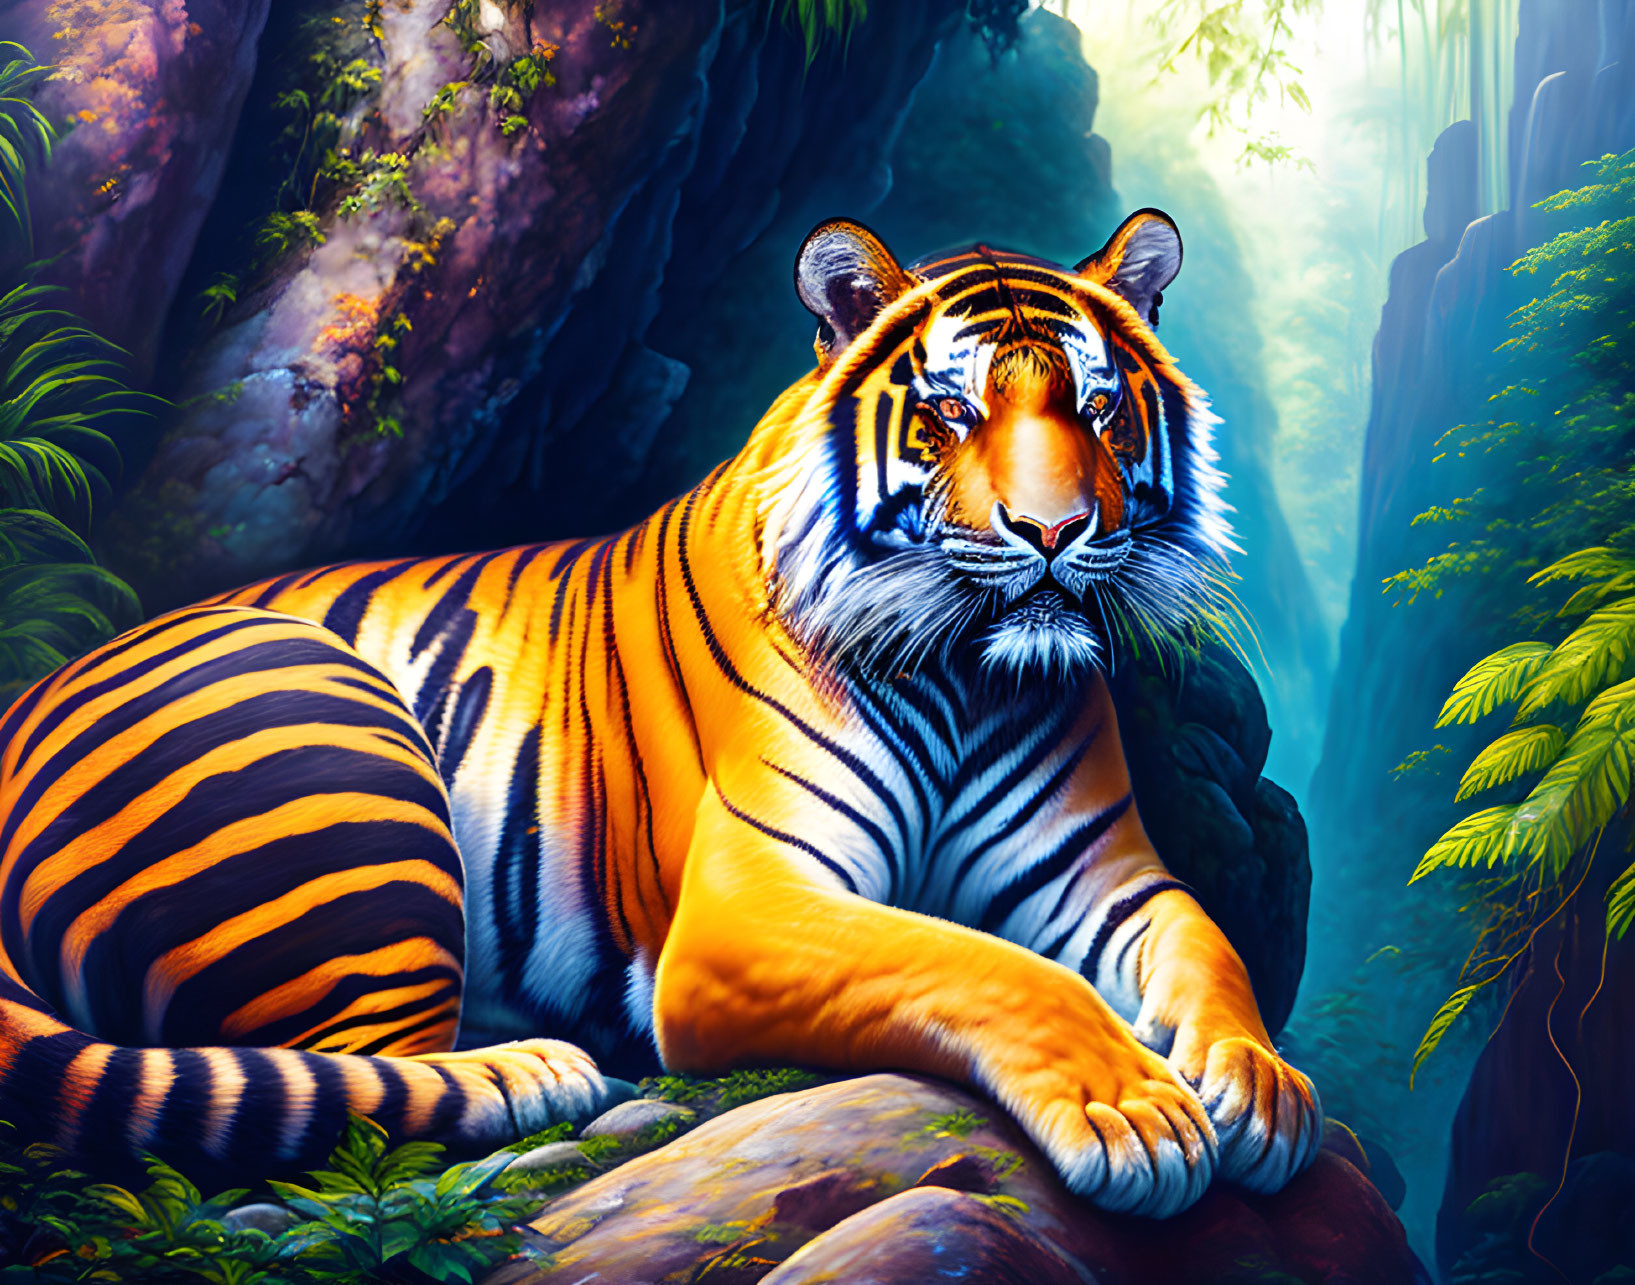 Colorful digital artwork: Tiger resting in jungle with sunlight filtering through foliage